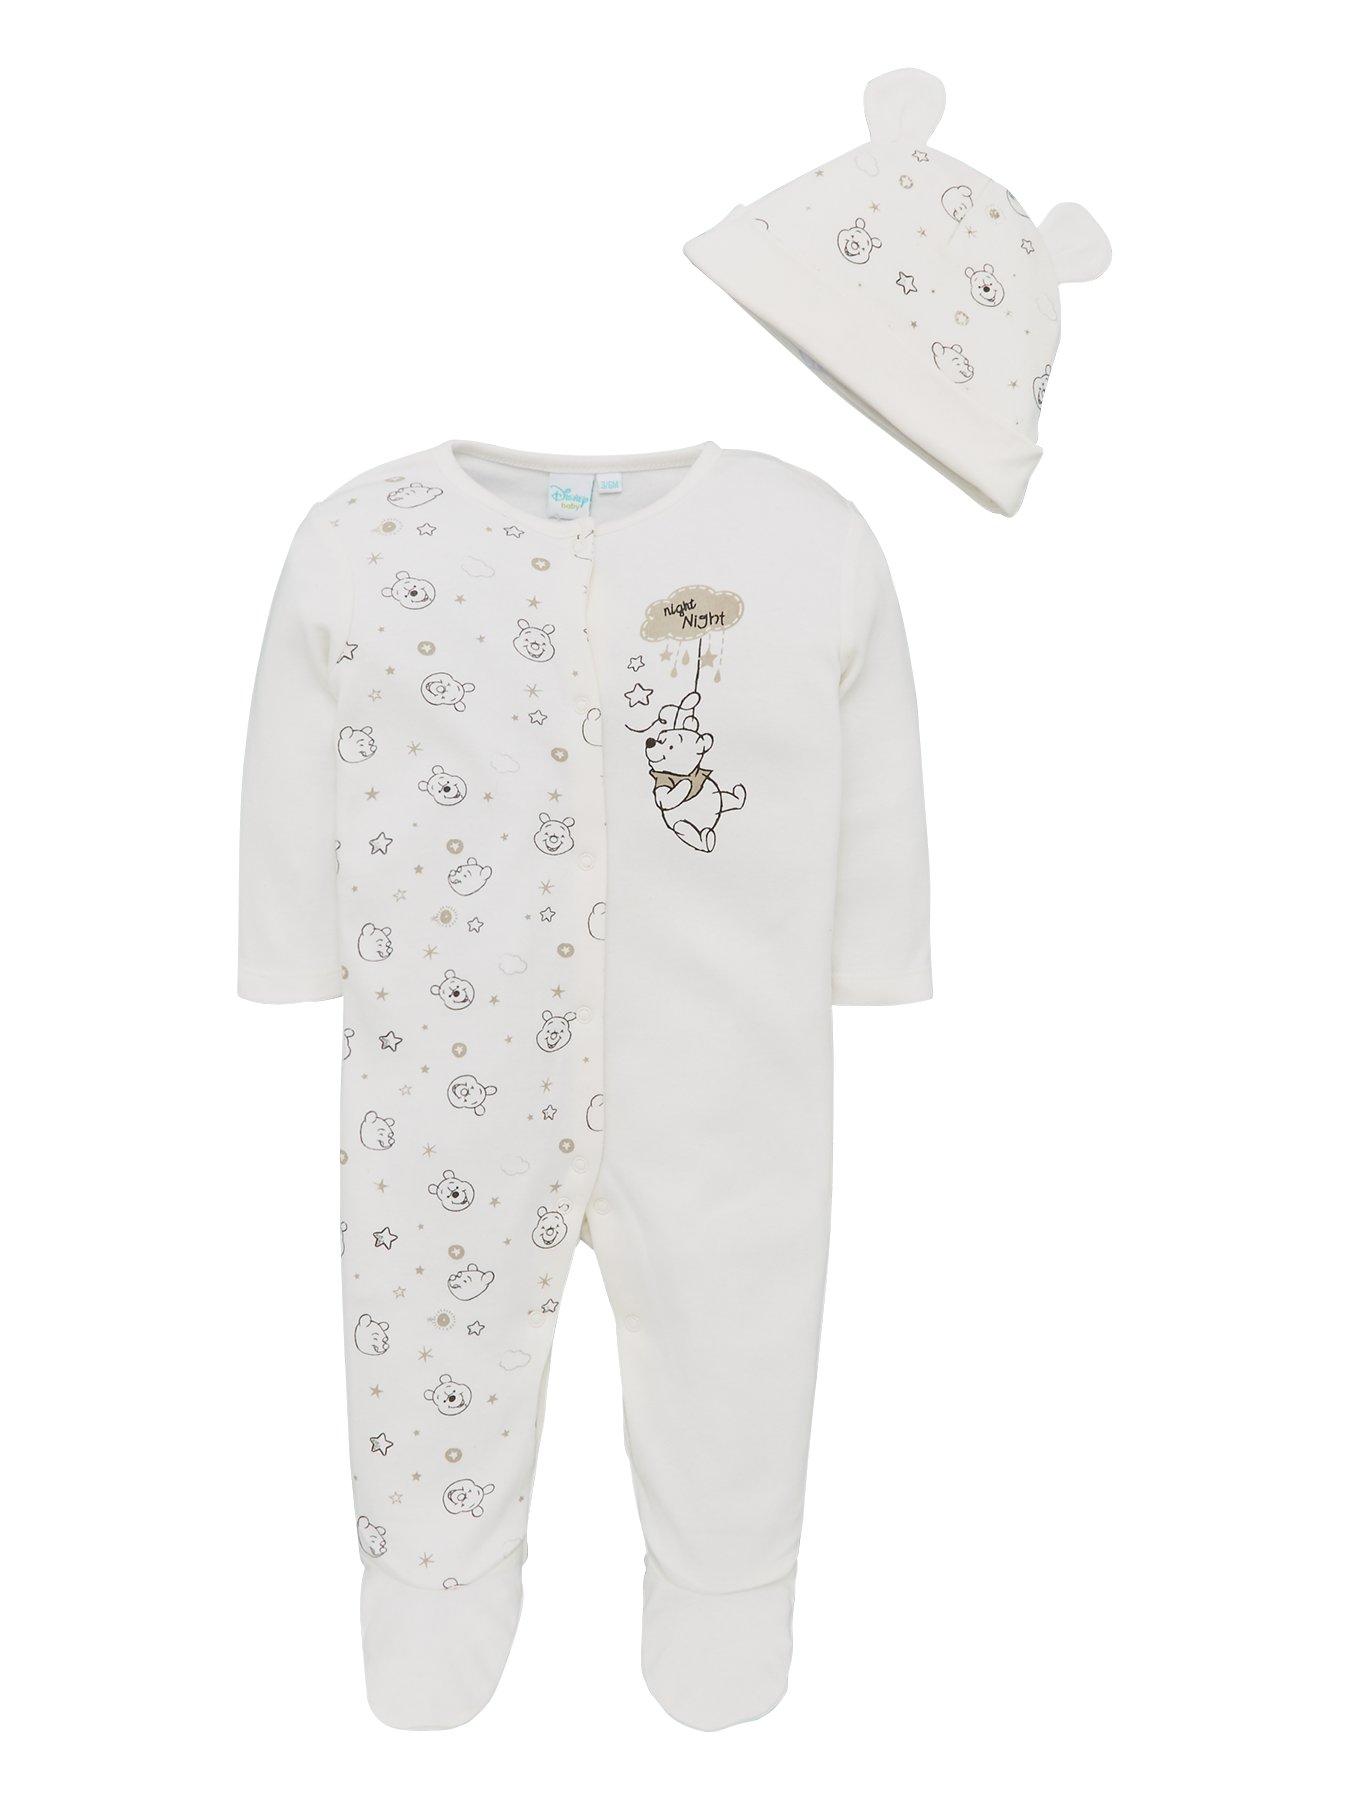 sleepsuit and hat